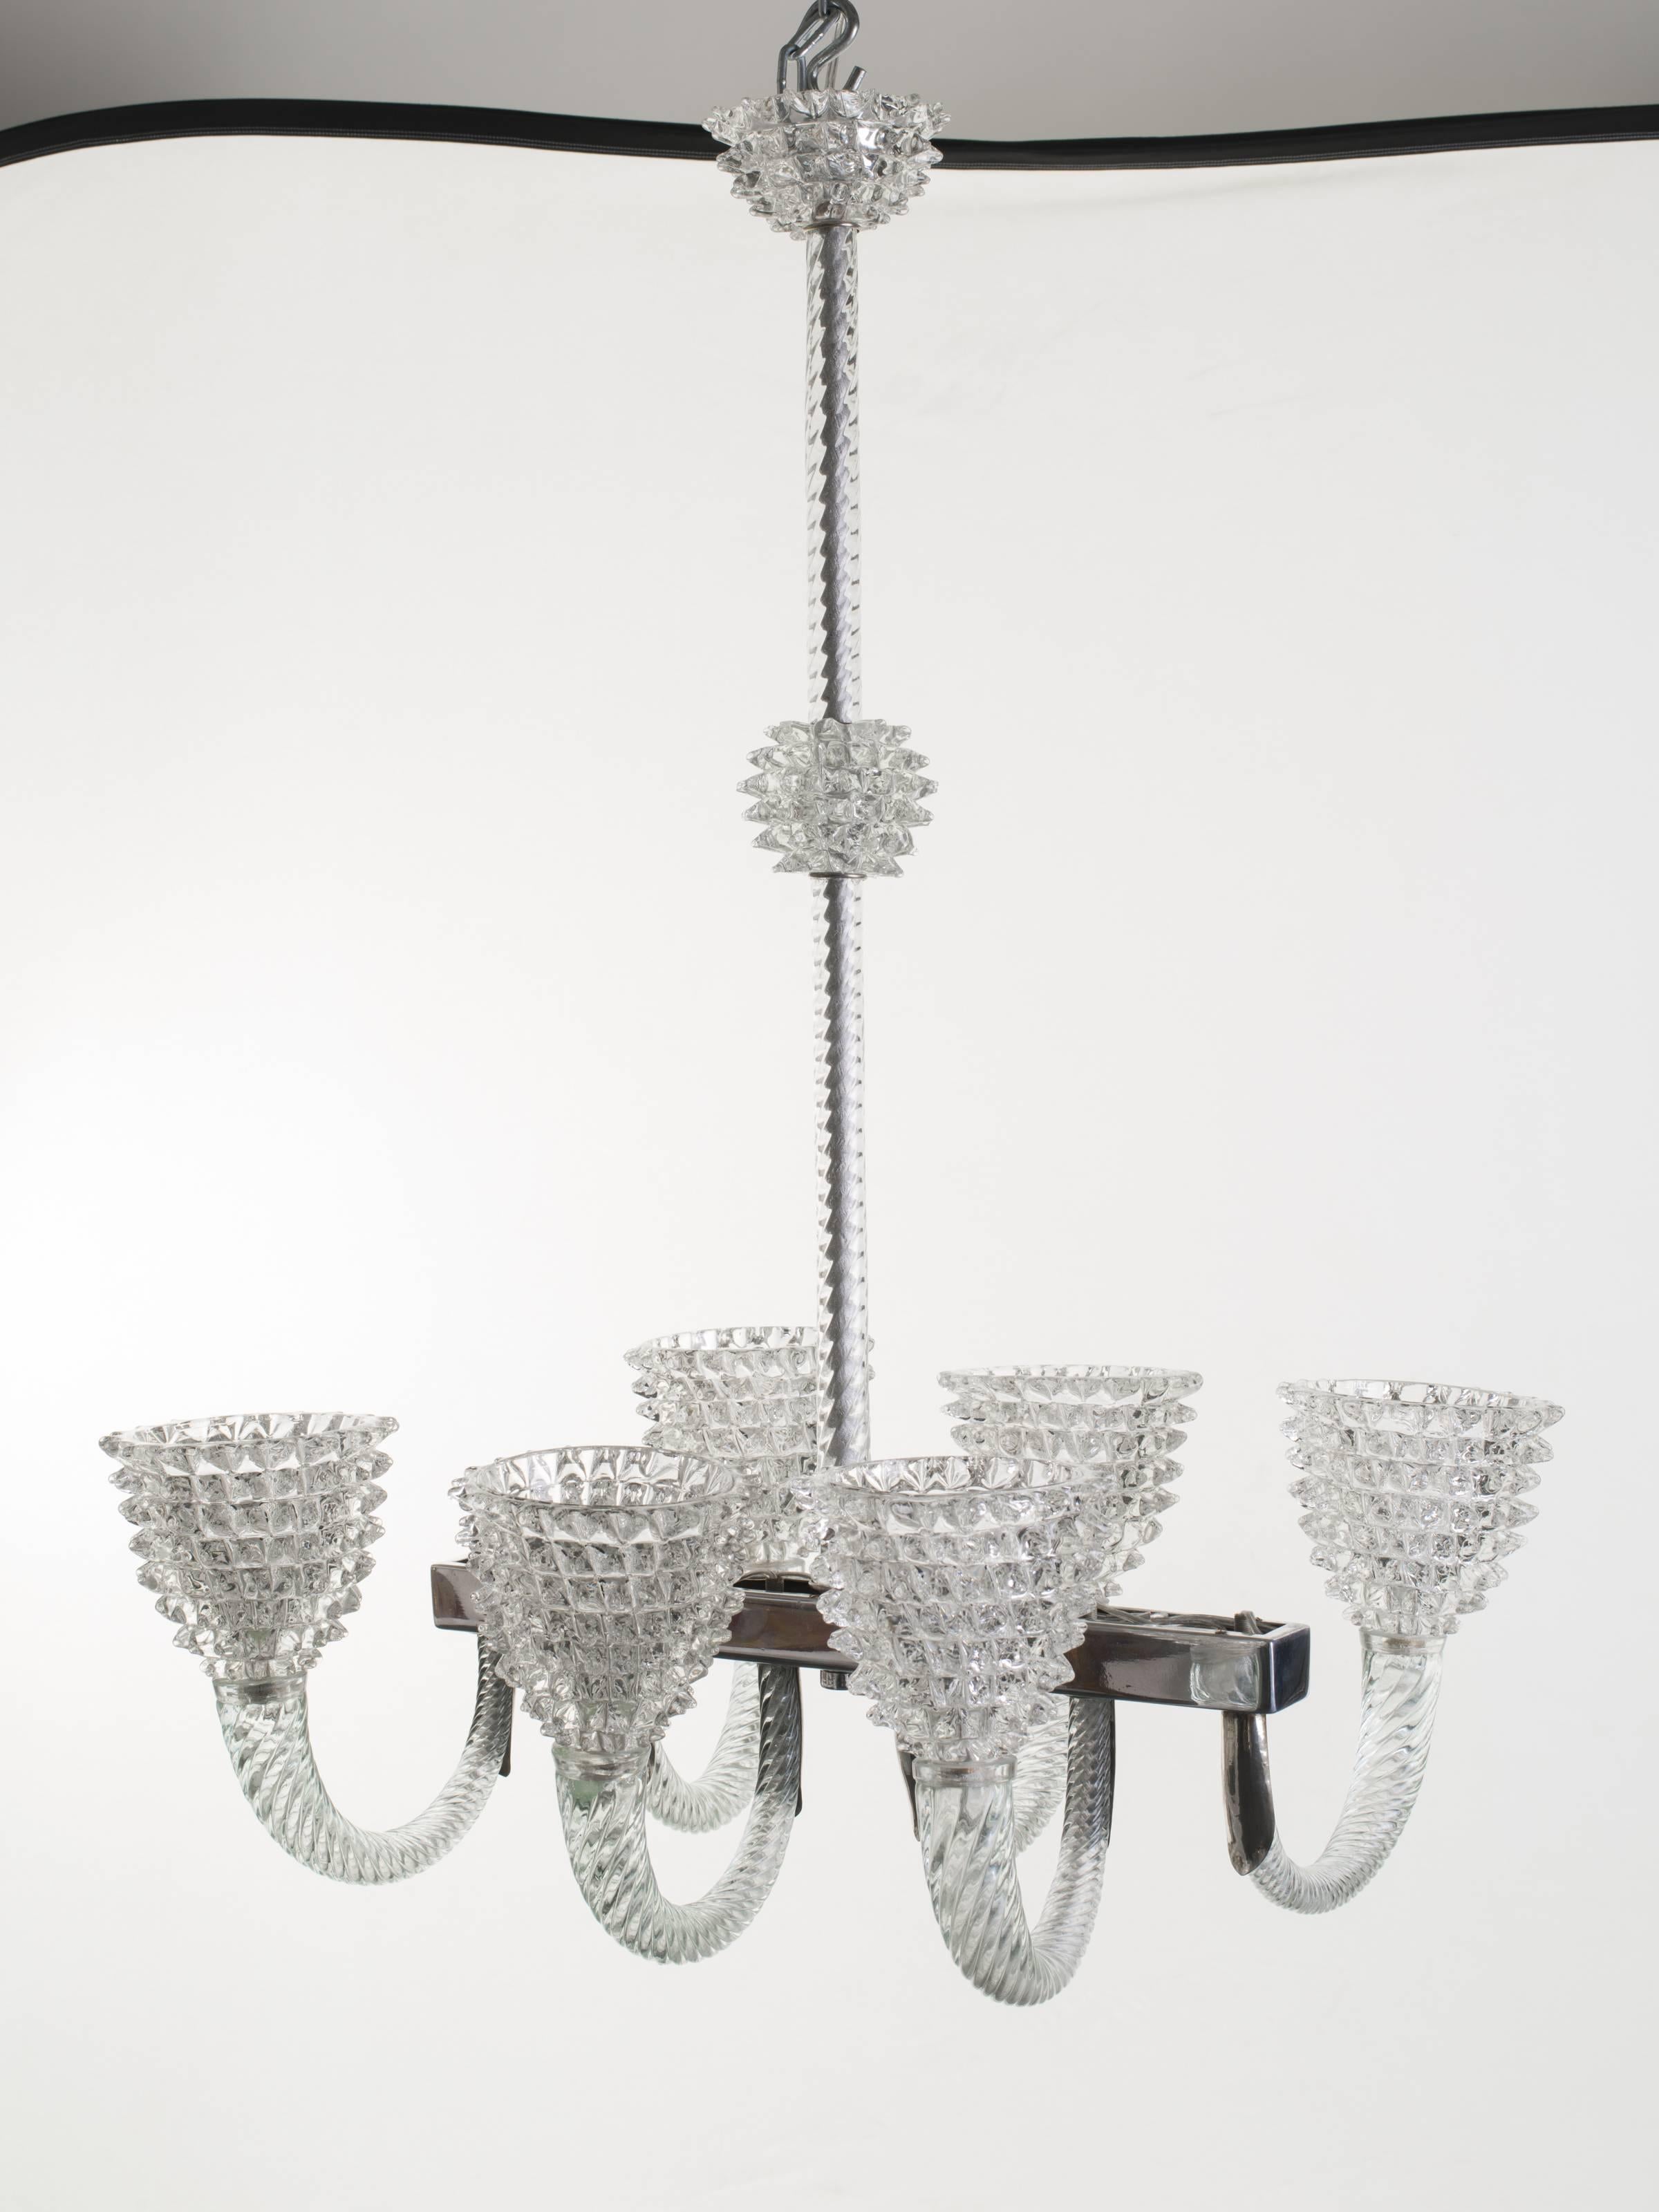 Vintage handblown clear glass [rostrato] oblong-shaped chandelier comprised of six lights. Ornate silver fittings and steel structure.

Measures: Stem is 31 in H and it can be shortened upon request.

Ferro Toso Vetrerie. Italy, circa 1940.